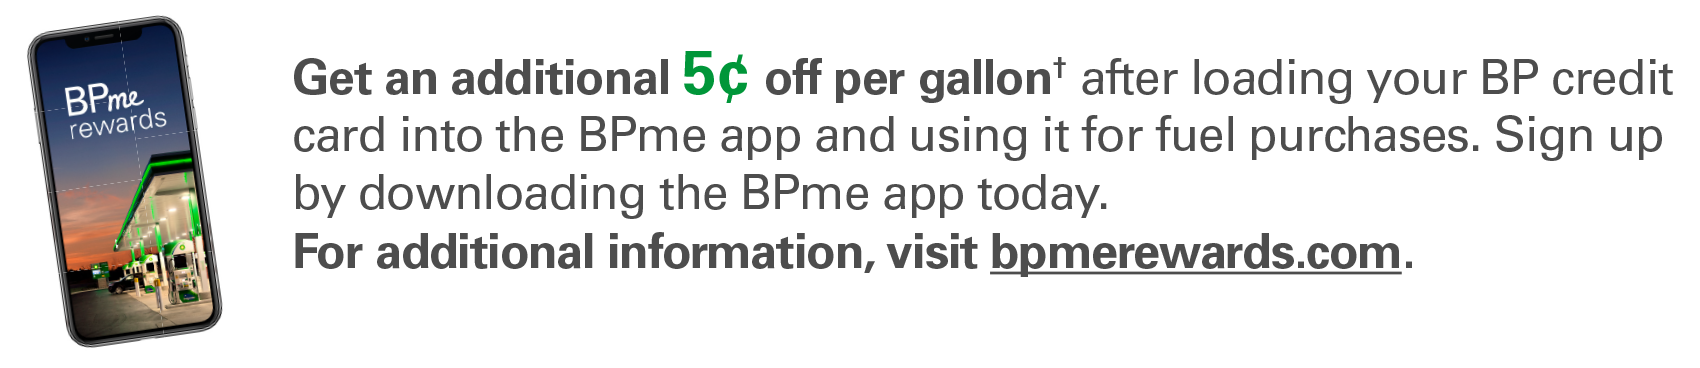 Get an additional 5¢ off per gallon† after loading your BP credit card into the BPme app and using it for fuel purchases. Sign up by downloading the BPme app today. For additional information, visit bpmerewards.com.